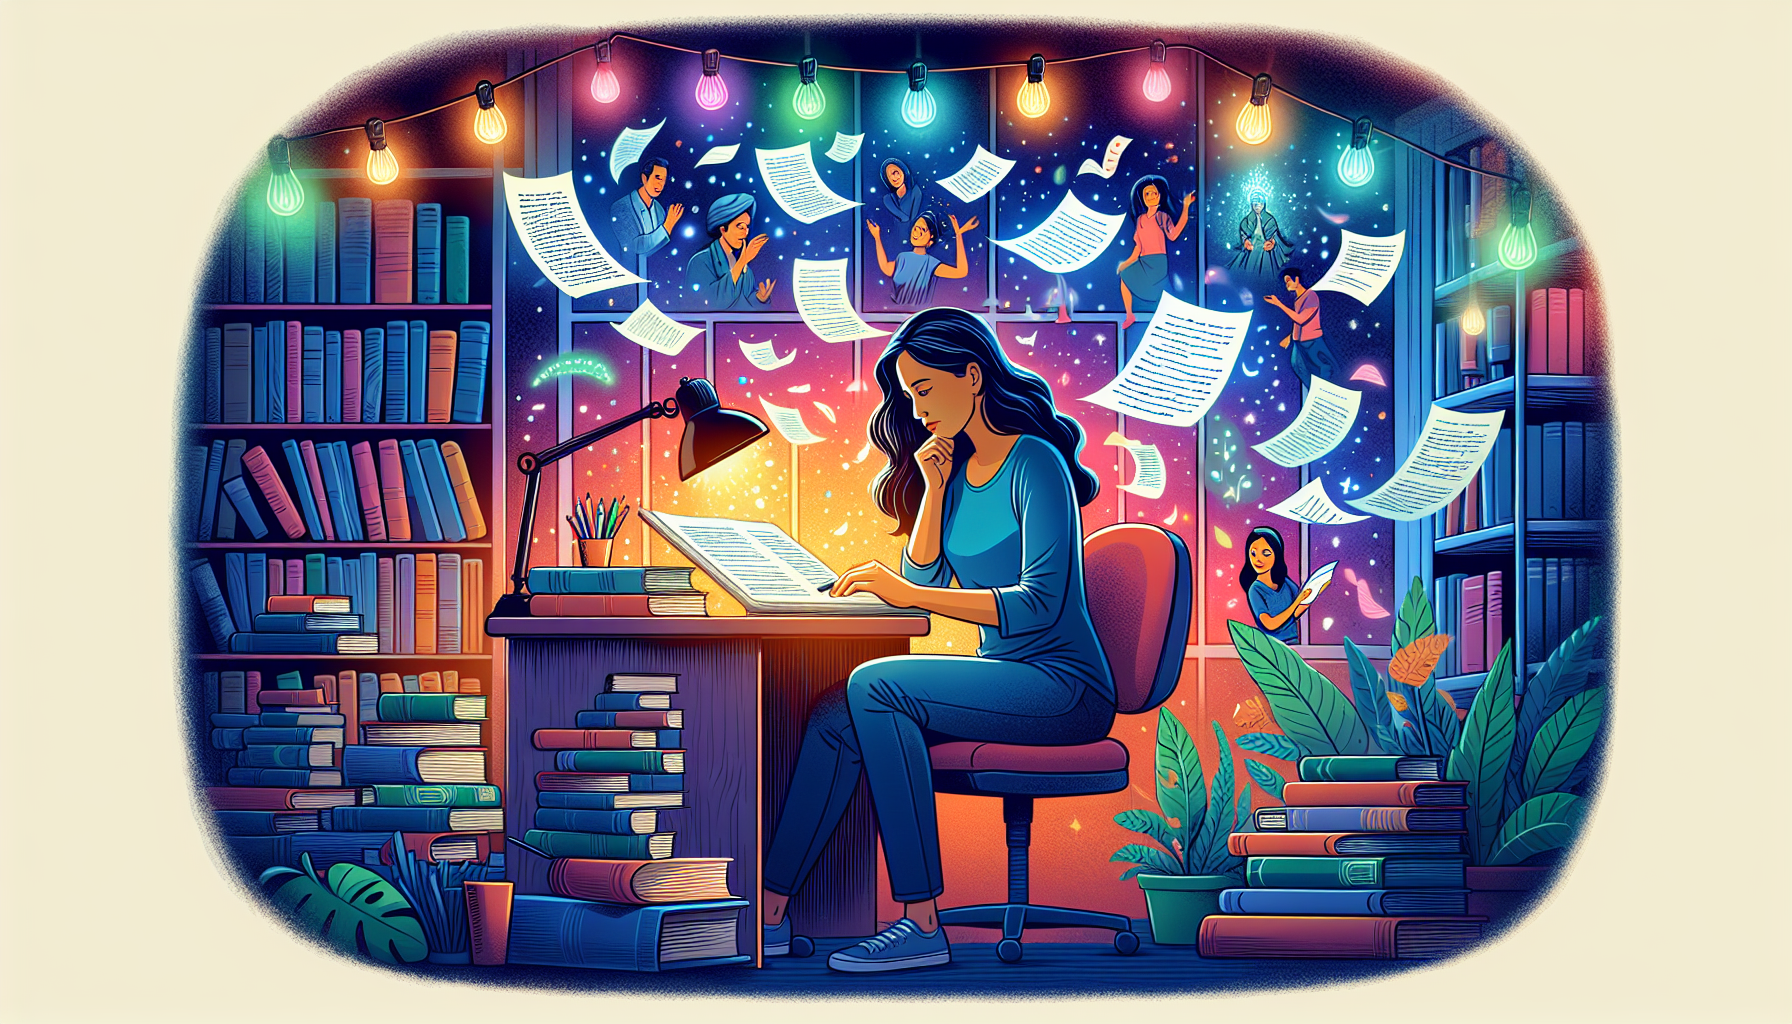 An imaginative depiction of a screenwriter lost in thought, surrounded by floating screenplay pages beneath the soft glow of a desk lamp, in a cozy, book-lined study, as characters from various storie